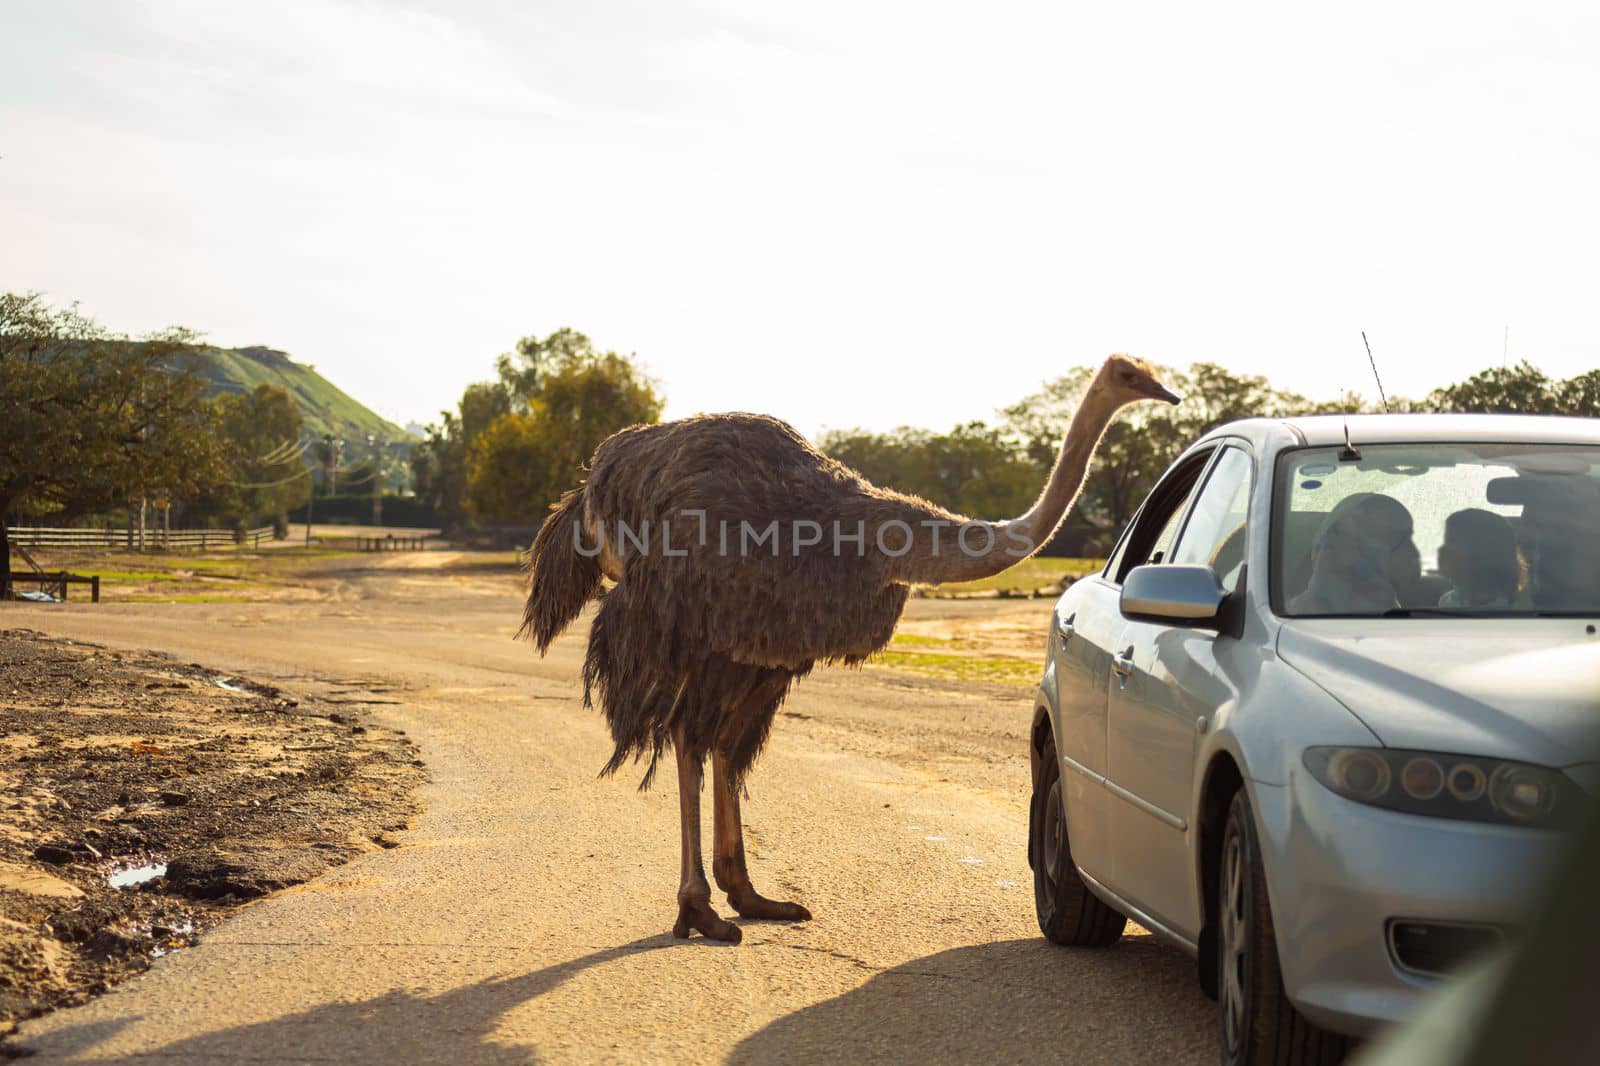 An ostrich on the road approaches cars begging for food by Try_my_best